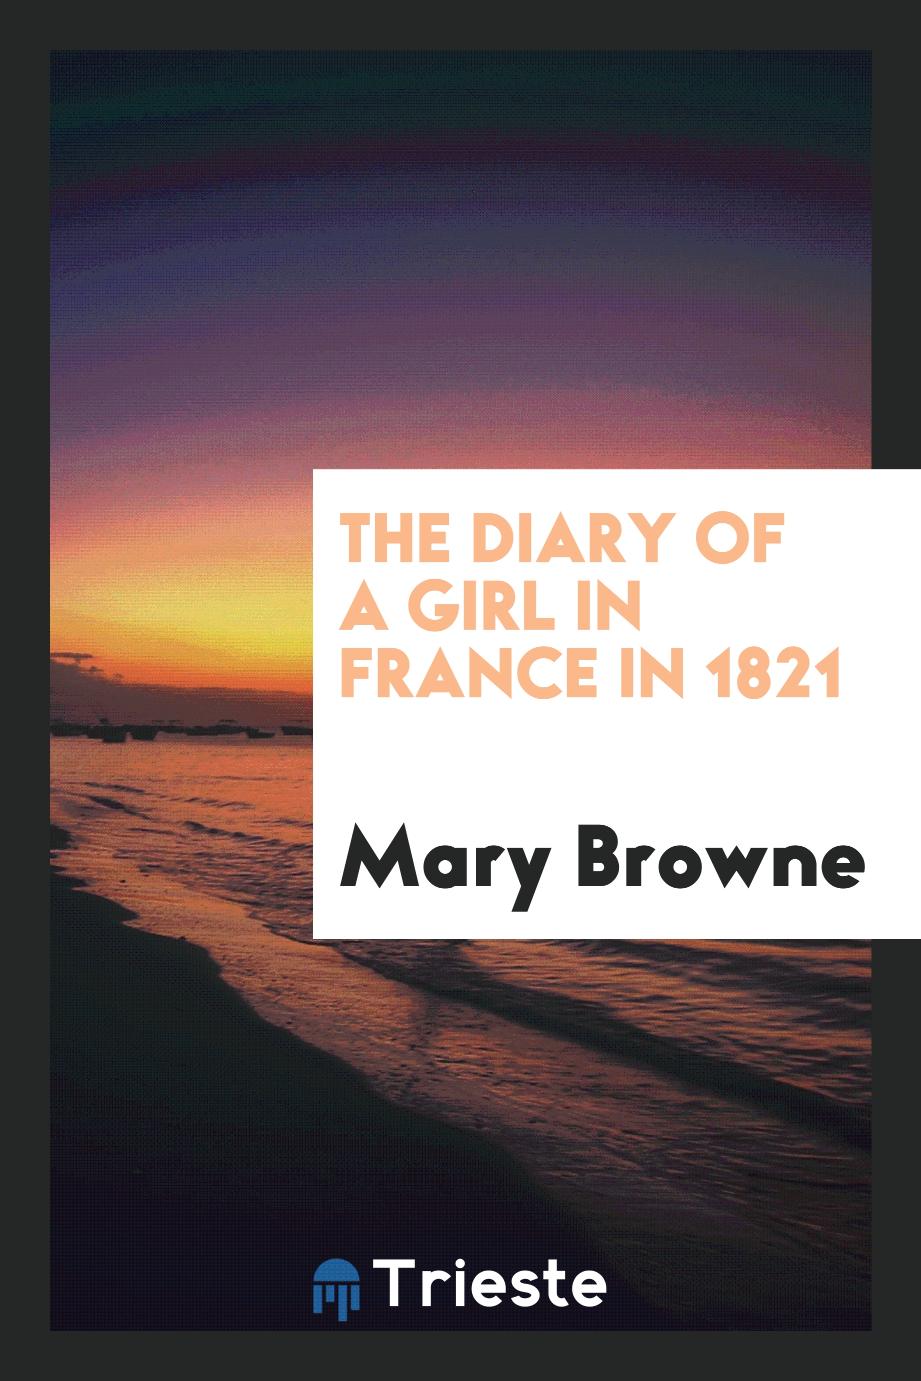 The diary of a girl in France in 1821